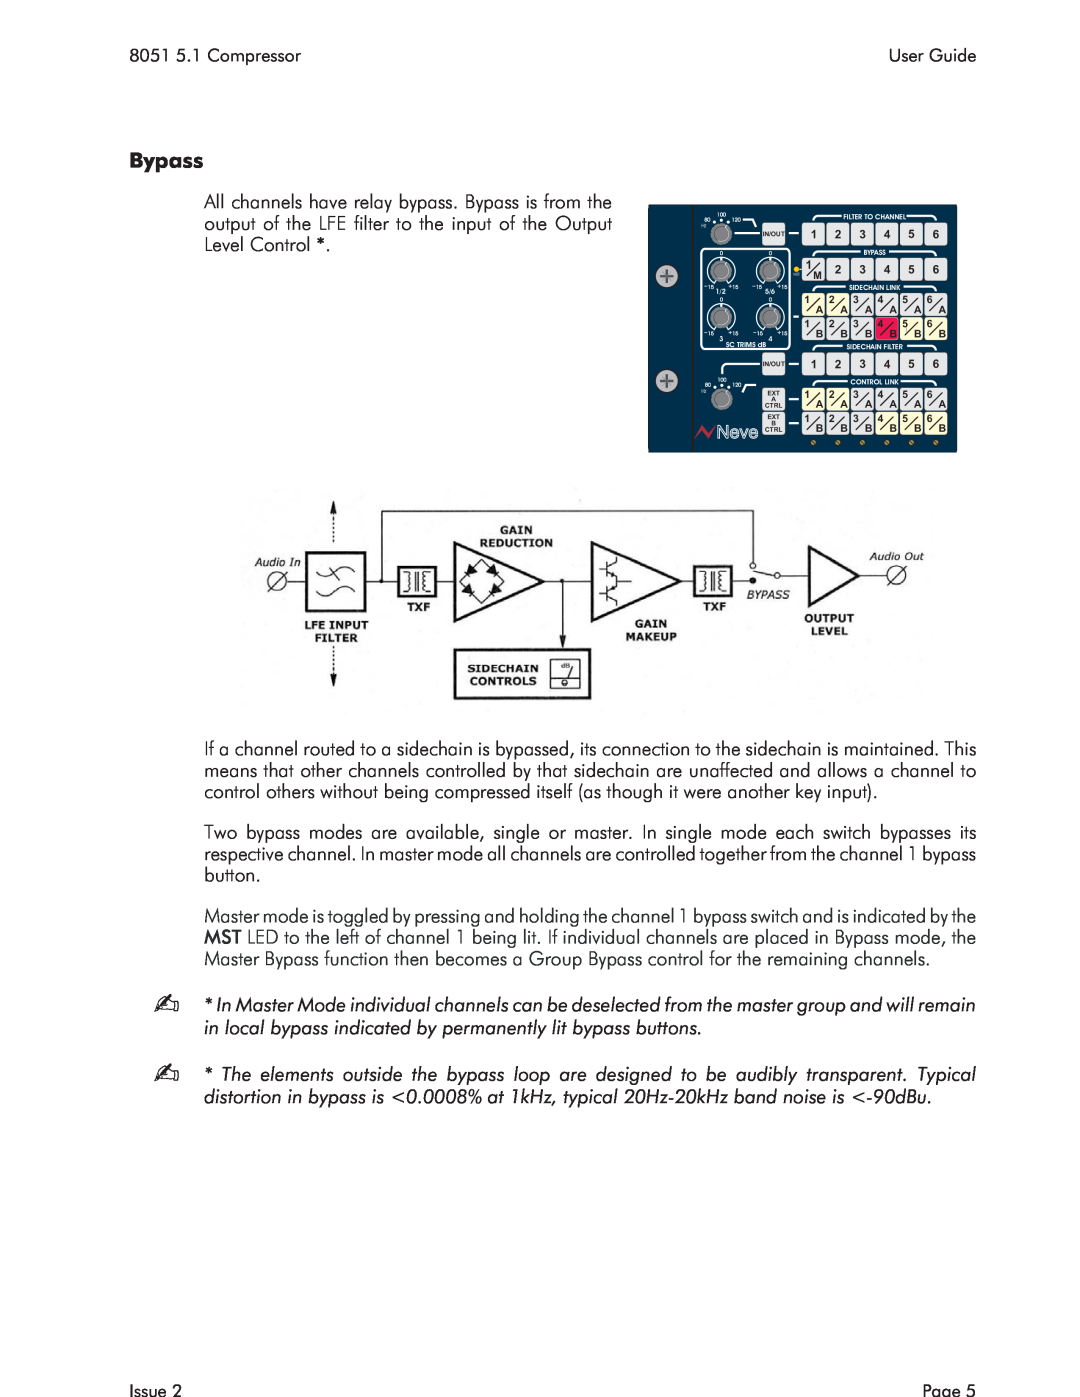 AMS specifications Bypass, 8051 5.1 Compressor, User Guide, Issue, Page 